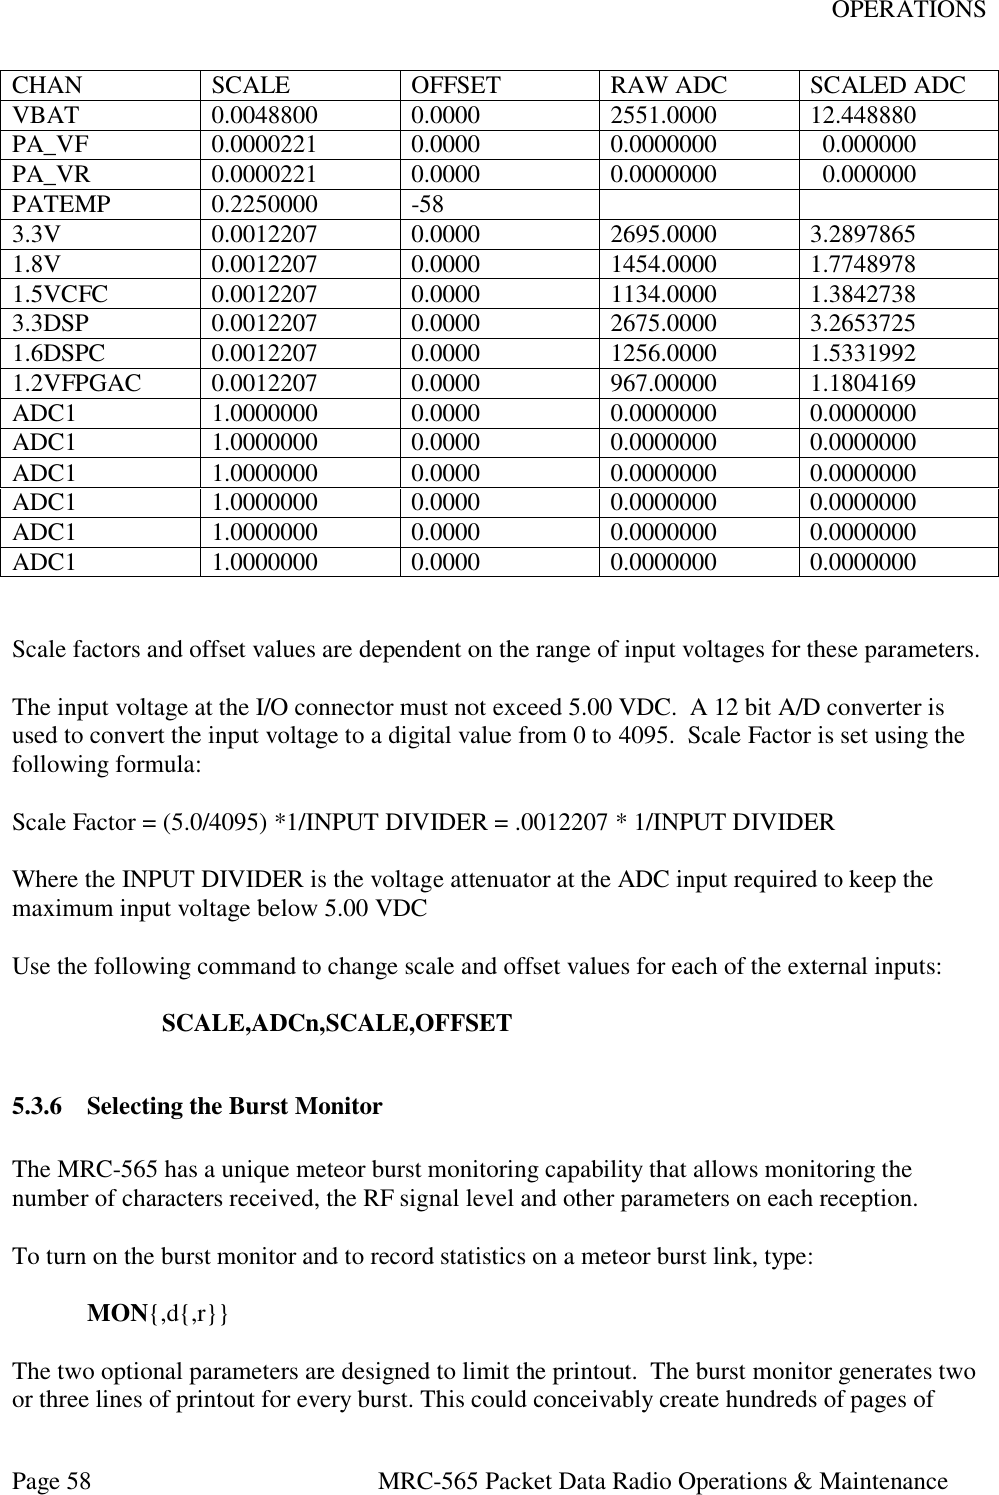 OPERATIONS Page 58  MRC-565 Packet Data Radio Operations &amp; Maintenance CHAN SCALE OFFSET RAW ADC SCALED ADC VBAT 0.0048800 0.0000 2551.0000 12.448880 PA_VF 0.0000221 0.0000 0.0000000   0.000000 PA_VR 0.0000221 0.0000 0.0000000   0.000000 PATEMP 0.2250000 -58   3.3V 0.0012207 0.0000 2695.0000 3.2897865 1.8V 0.0012207 0.0000 1454.0000 1.7748978 1.5VCFC 0.0012207 0.0000 1134.0000 1.3842738 3.3DSP 0.0012207 0.0000 2675.0000 3.2653725 1.6DSPC 0.0012207 0.0000 1256.0000 1.5331992 1.2VFPGAC 0.0012207 0.0000 967.00000 1.1804169 ADC1 1.0000000 0.0000 0.0000000 0.0000000 ADC1 1.0000000 0.0000 0.0000000 0.0000000 ADC1 1.0000000 0.0000 0.0000000 0.0000000 ADC1 1.0000000 0.0000 0.0000000 0.0000000 ADC1 1.0000000 0.0000 0.0000000 0.0000000 ADC1 1.0000000 0.0000 0.0000000 0.0000000   Scale factors and offset values are dependent on the range of input voltages for these parameters.    The input voltage at the I/O connector must not exceed 5.00 VDC.  A 12 bit A/D converter is used to convert the input voltage to a digital value from 0 to 4095.  Scale Factor is set using the following formula:  Scale Factor = (5.0/4095) *1/INPUT DIVIDER = .0012207 * 1/INPUT DIVIDER  Where the INPUT DIVIDER is the voltage attenuator at the ADC input required to keep the maximum input voltage below 5.00 VDC   Use the following command to change scale and offset values for each of the external inputs:  SCALE,ADCn,SCALE,OFFSET  5.3.6 Selecting the Burst Monitor  The MRC-565 has a unique meteor burst monitoring capability that allows monitoring the number of characters received, the RF signal level and other parameters on each reception.  To turn on the burst monitor and to record statistics on a meteor burst link, type:   MON{,d{,r}}  The two optional parameters are designed to limit the printout.  The burst monitor generates two or three lines of printout for every burst. This could conceivably create hundreds of pages of 